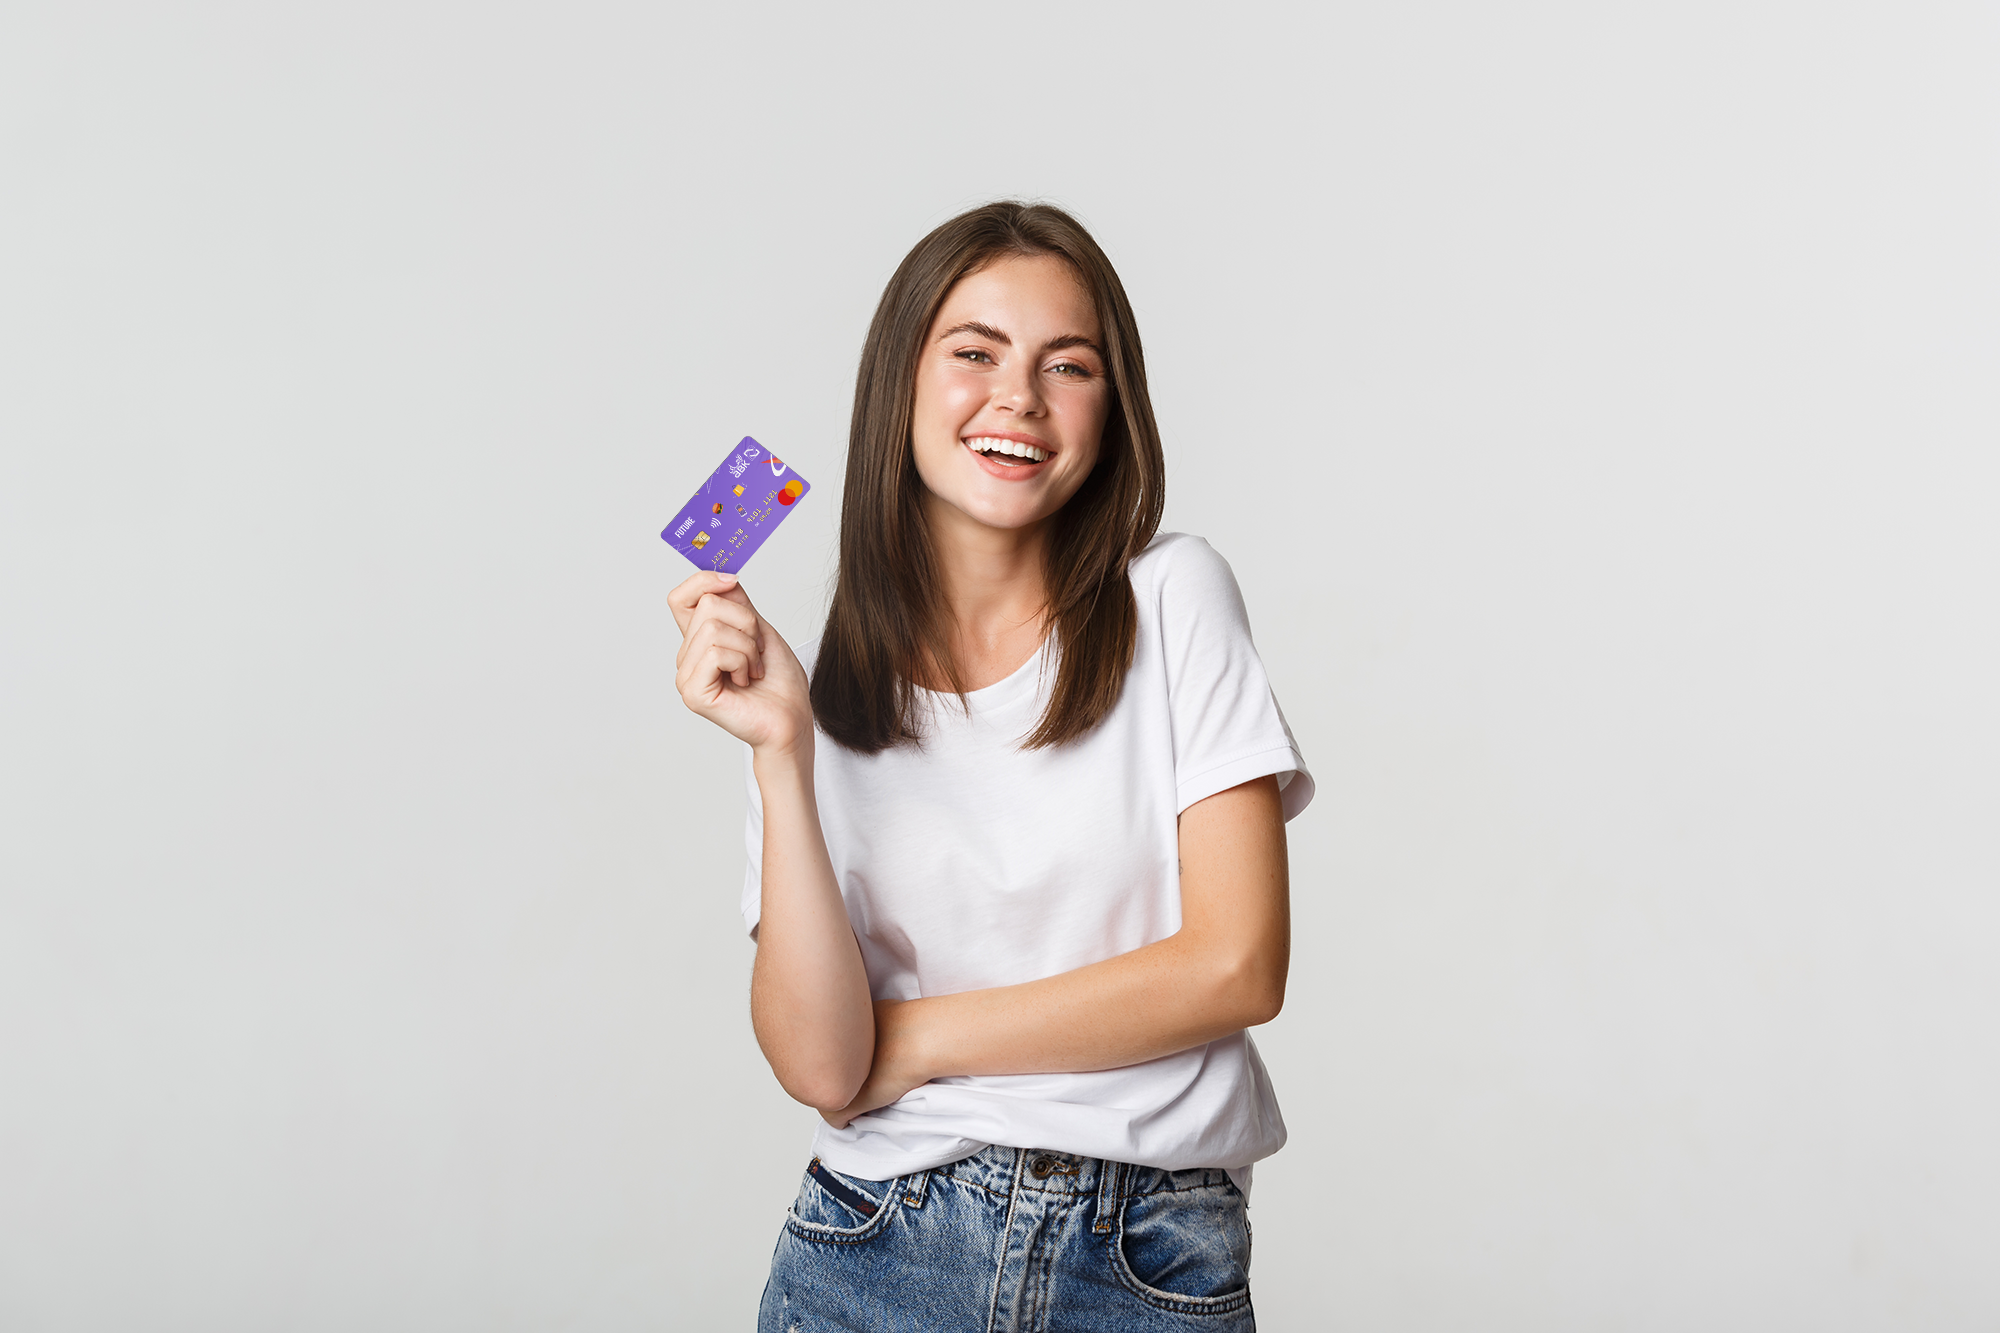 ABK NEXT Mastercard Debit Card for Youth